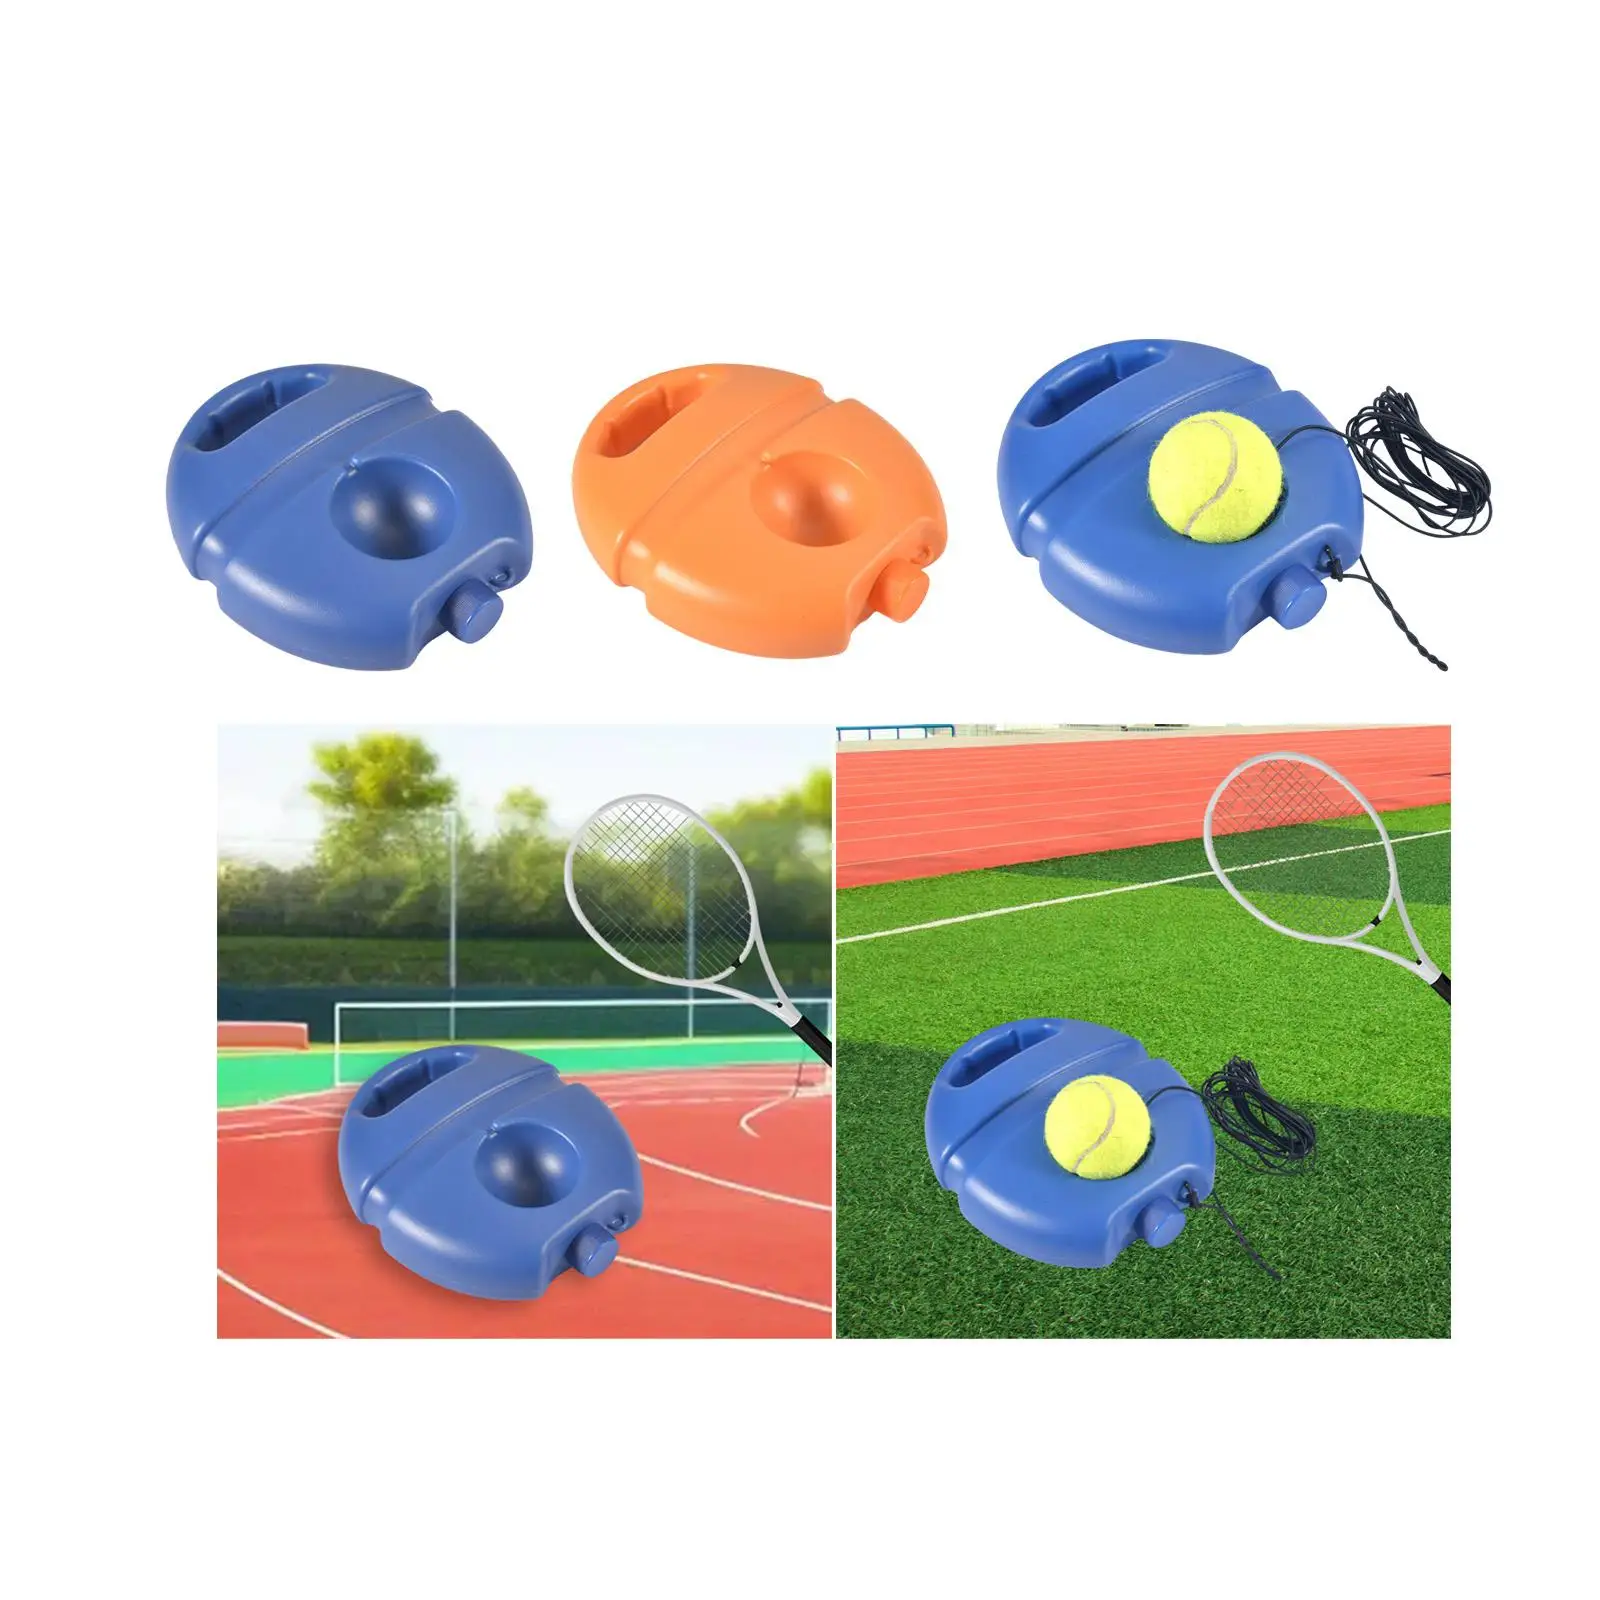 Tennis Trainer Base Pickleball Trainer for Sports Outdoor Beginners Practice